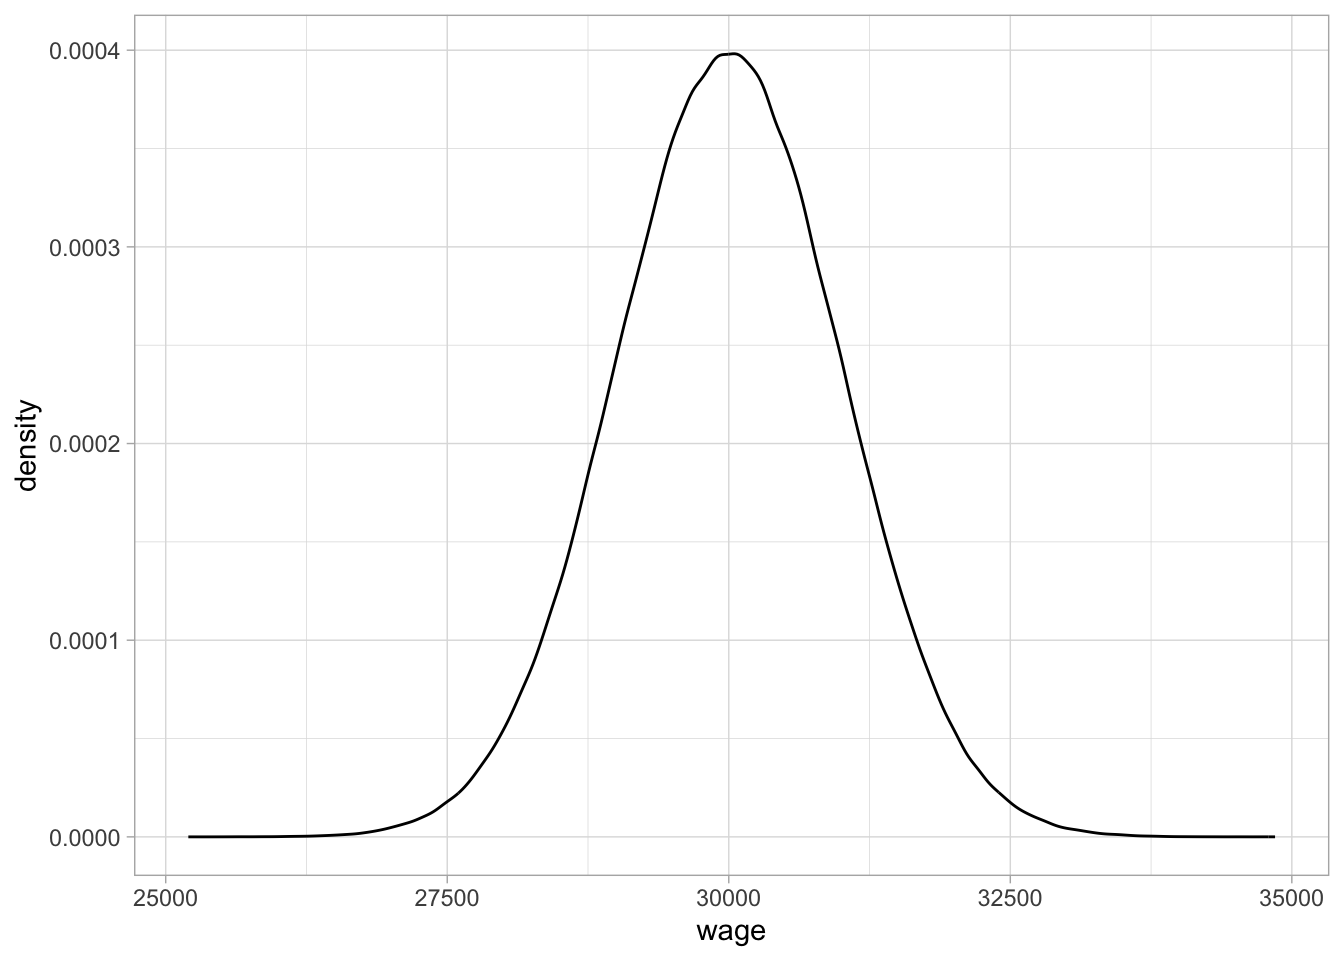 A density plot of the wage variable.